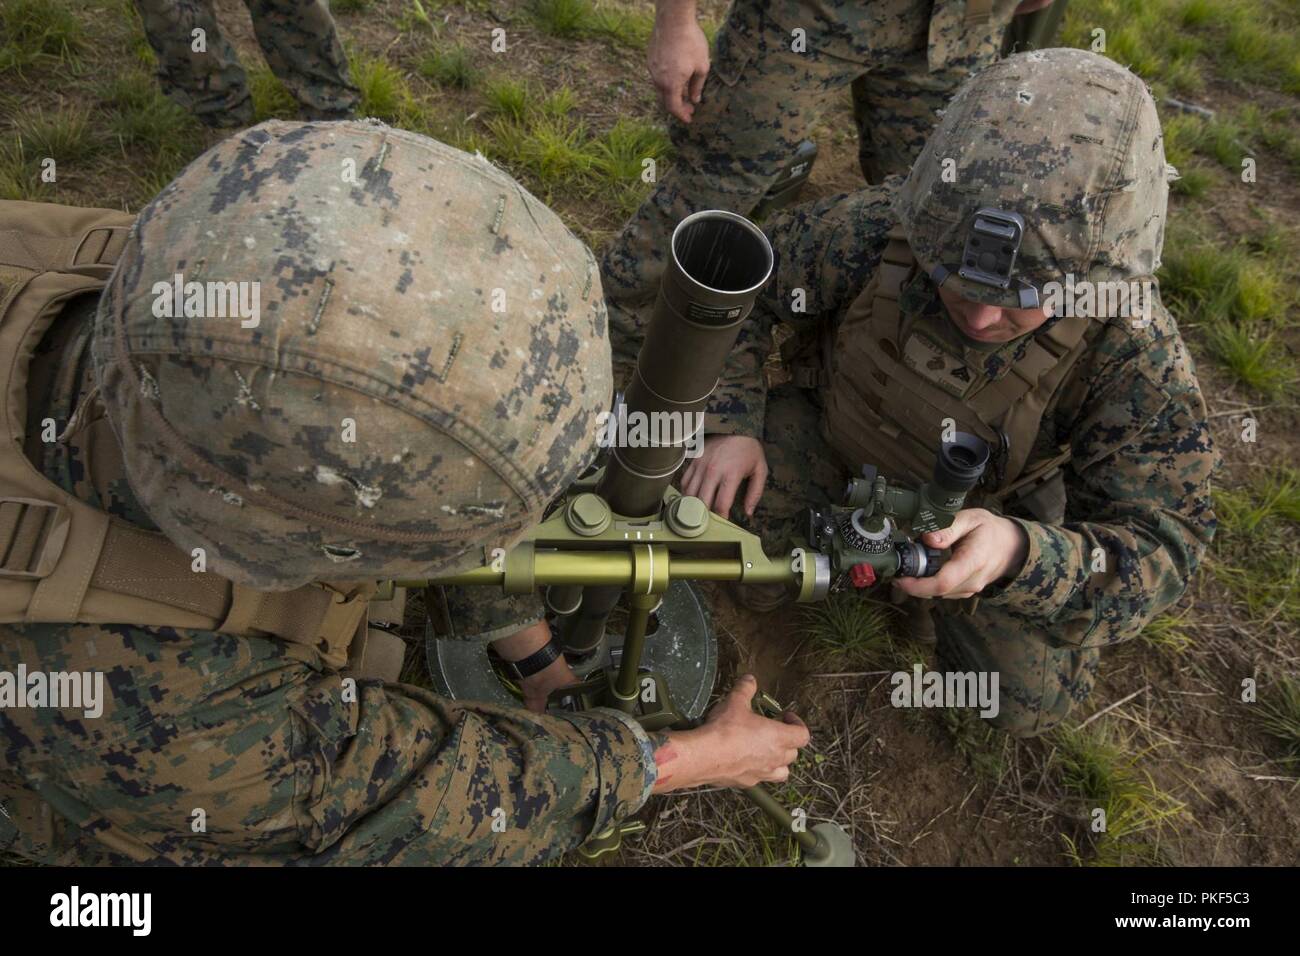 Mortarmen with Lima Company, 3rd Battalion, 25th Marine Regiment, adjust a M224 60mm Mortar during Exercise Northern Strike at Camp Grayling, Mich., Aug. 7, 2018. Northern Strike’s mission is to exercise participating units’ full-spectrum of capabilities through realistic, cost-effective joint fires training in an adaptable environment, with an emphasis on joint and coalition force cooperation. Stock Photo